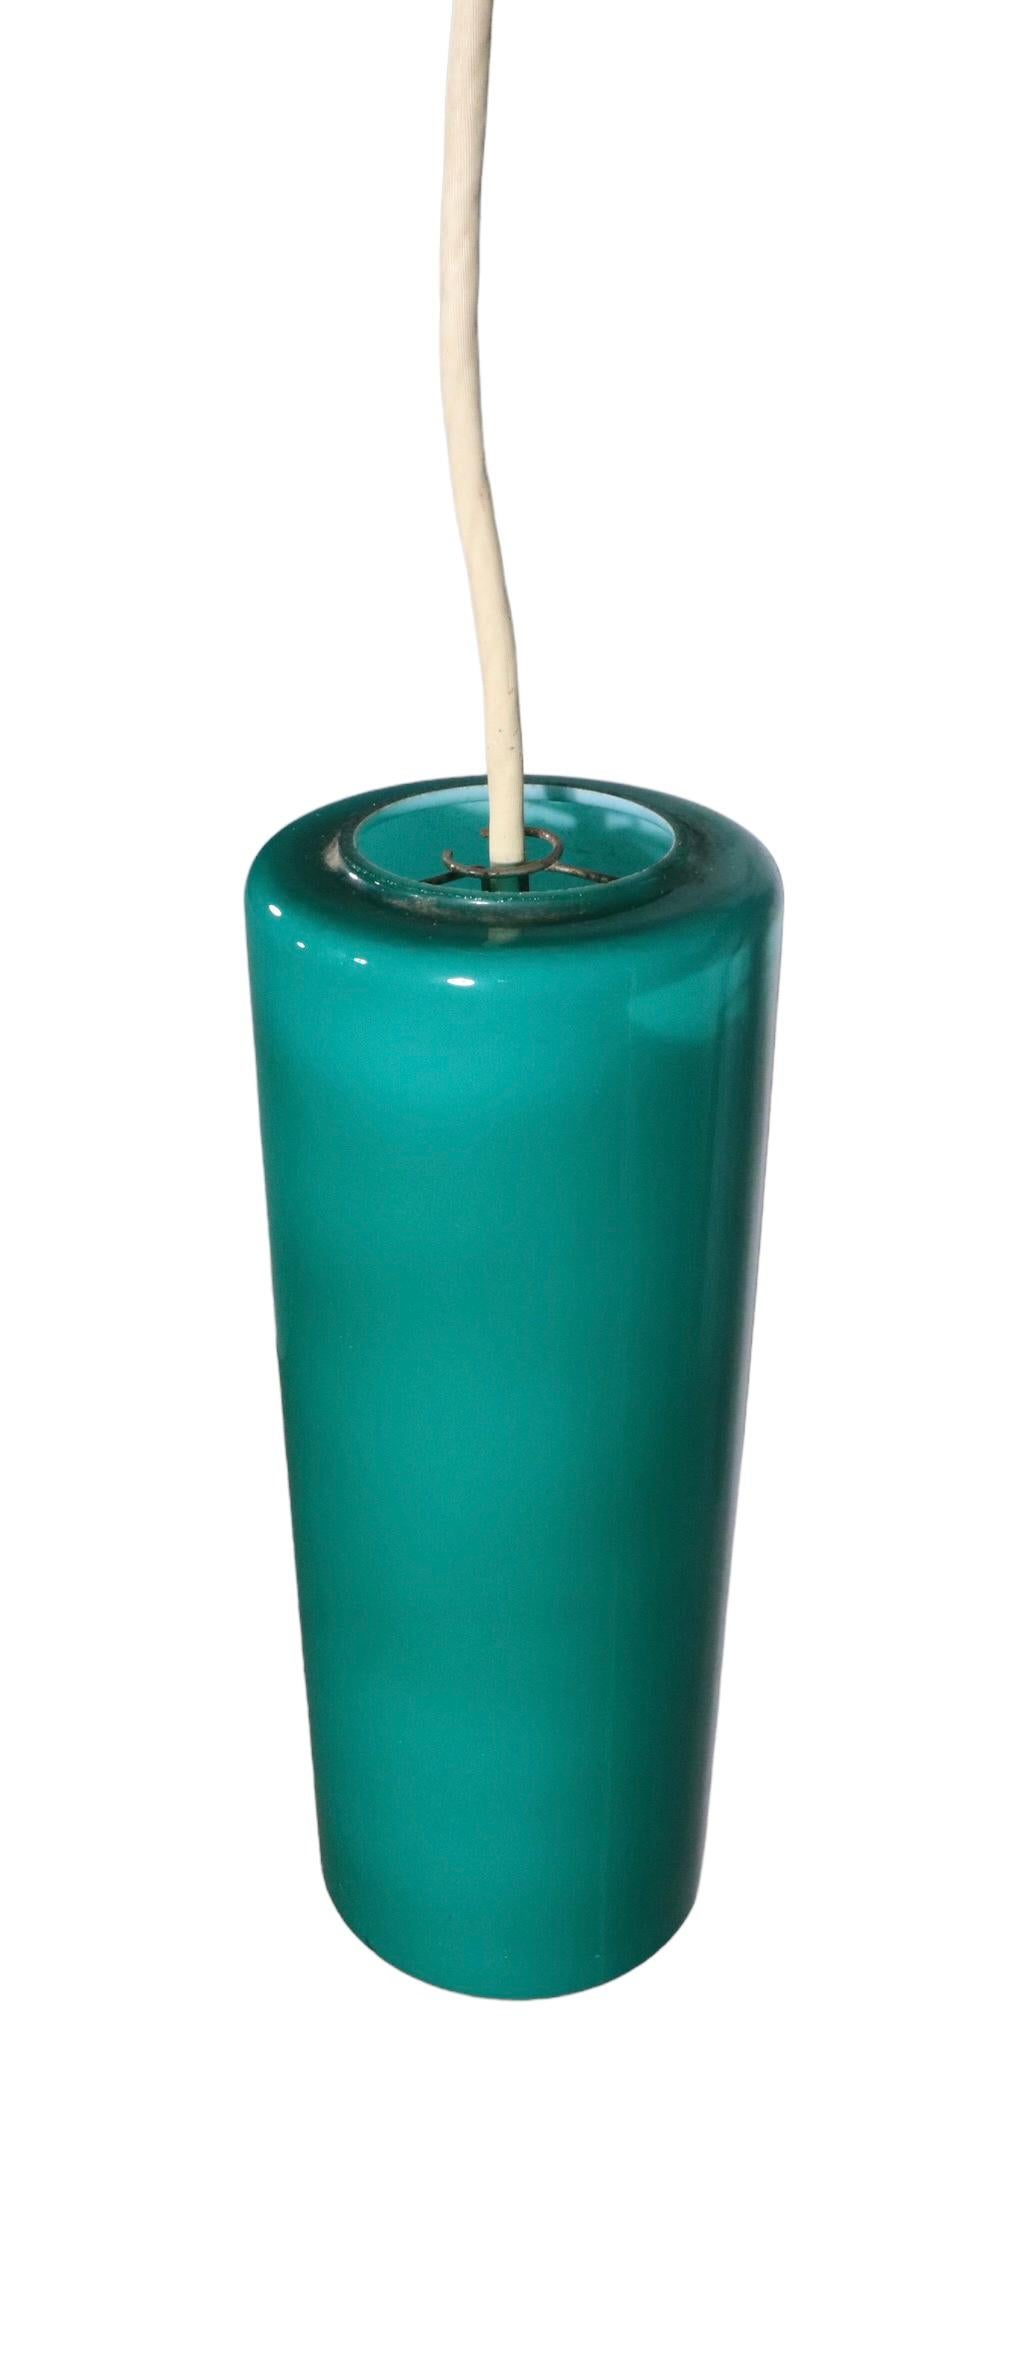 Prescolite Cylinder Pendant Chandelier in Green Glass, C 1950 - 1970's For Sale 2